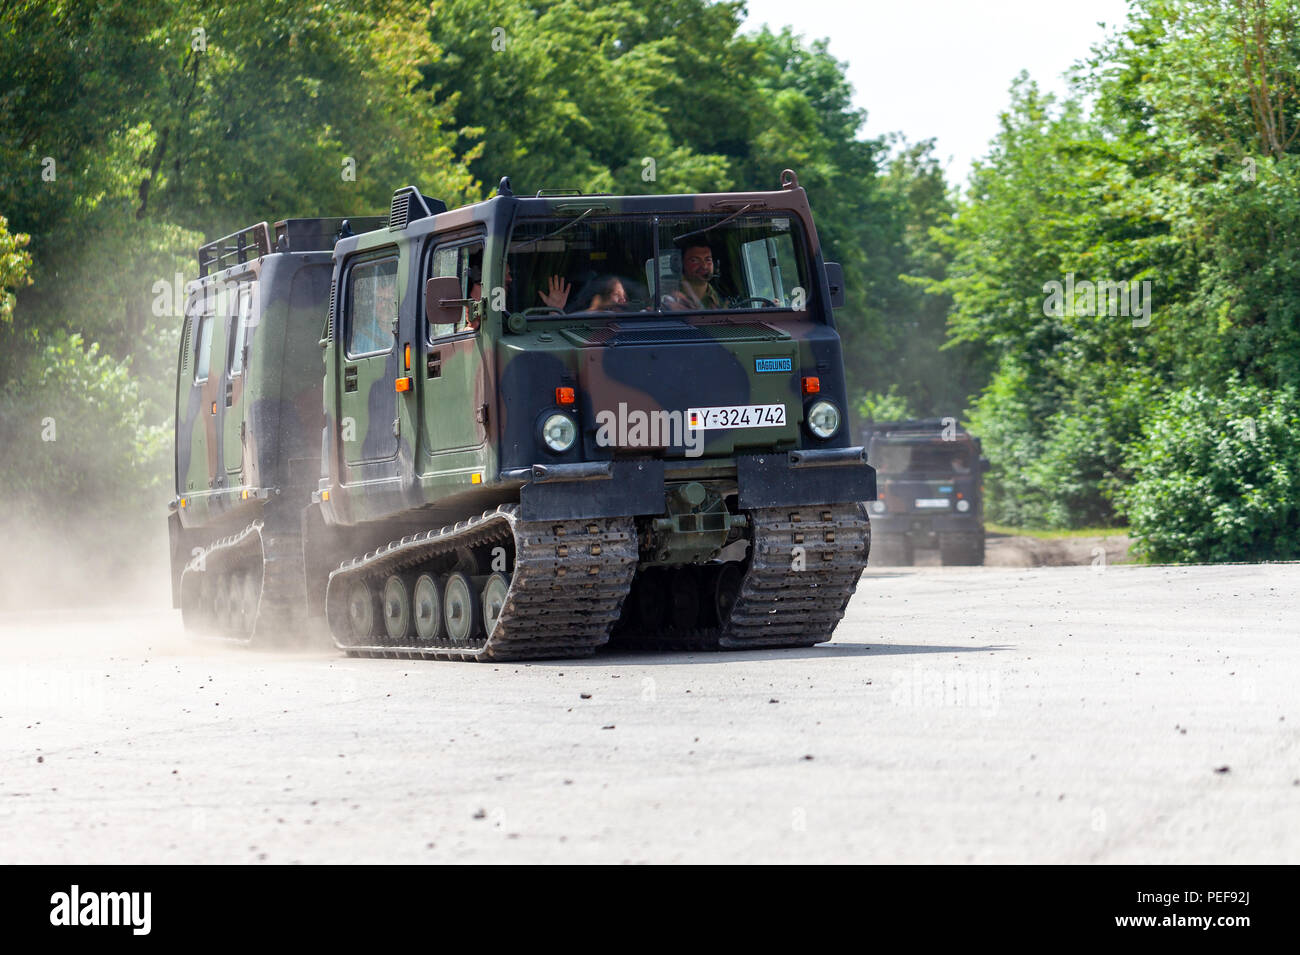 FELDKIRCHEN / GERMANY - JUNE 9, 2018: German armoured personnel carrier Bandvagn 206, from Bundeswehr, drives on a road at Day of the Bundeswehr. Stock Photo